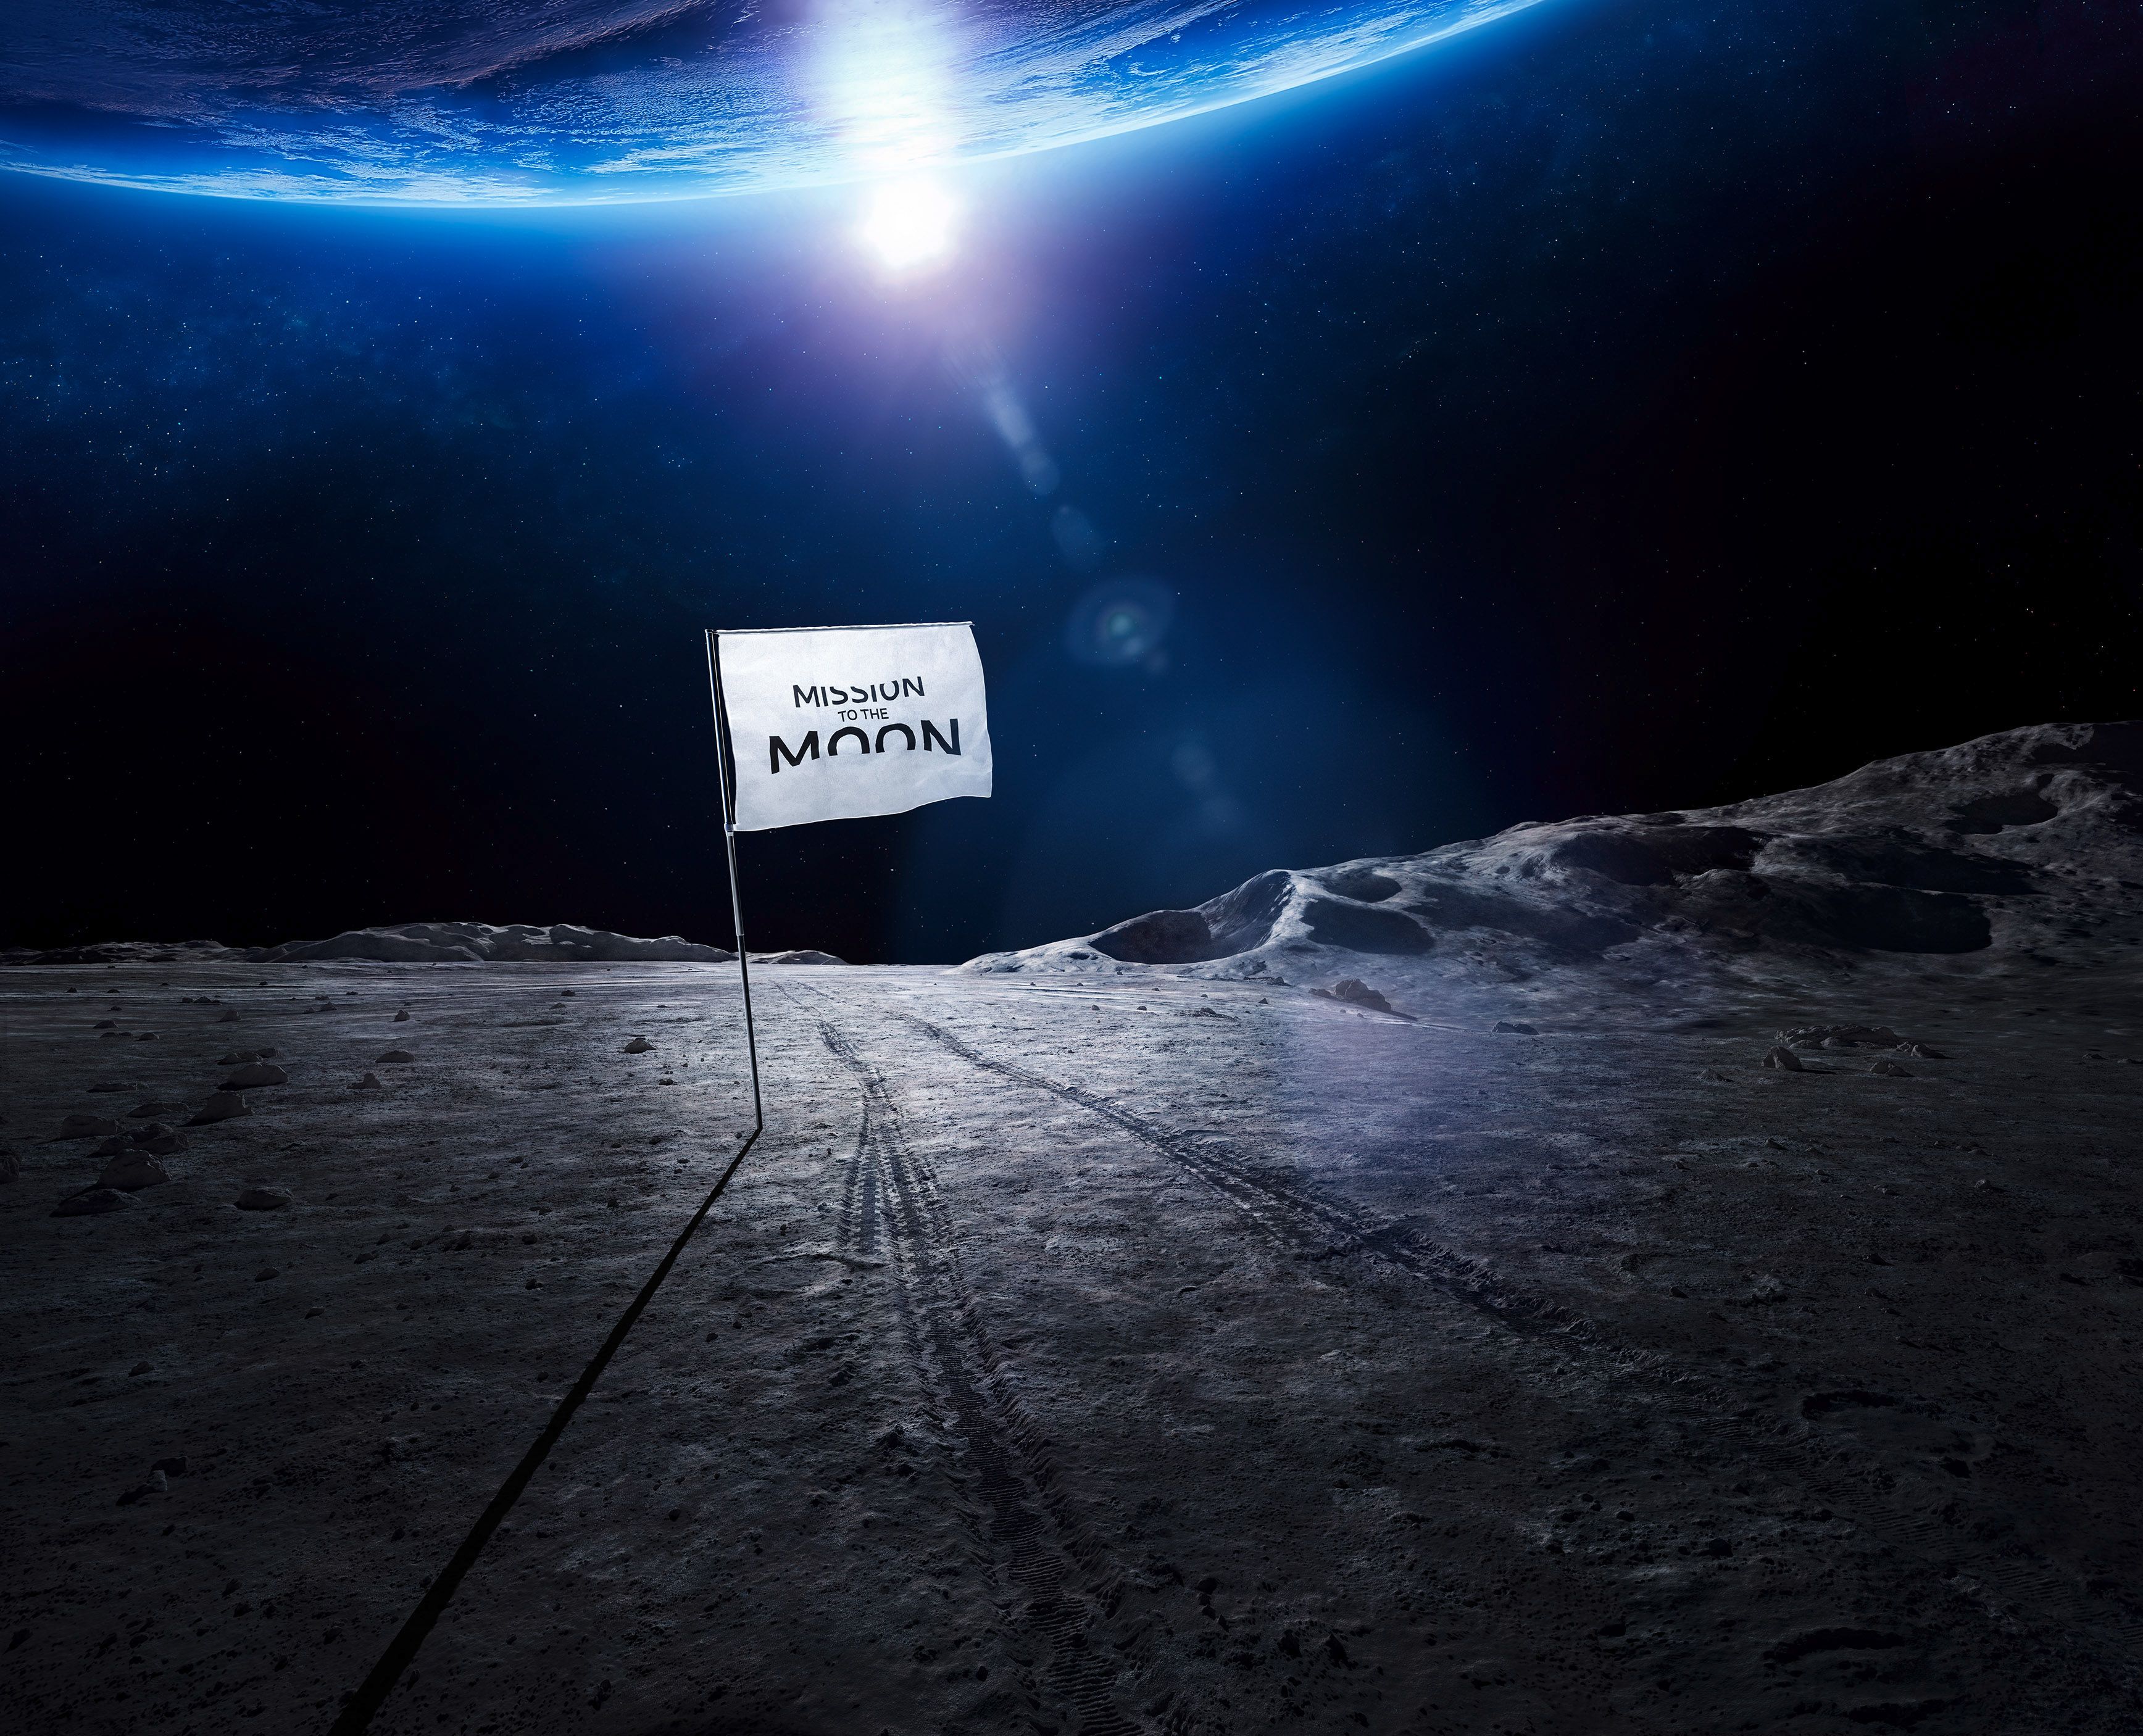 Wallpaper Mission to the Moon, Audi Moon landing project, HD, Space